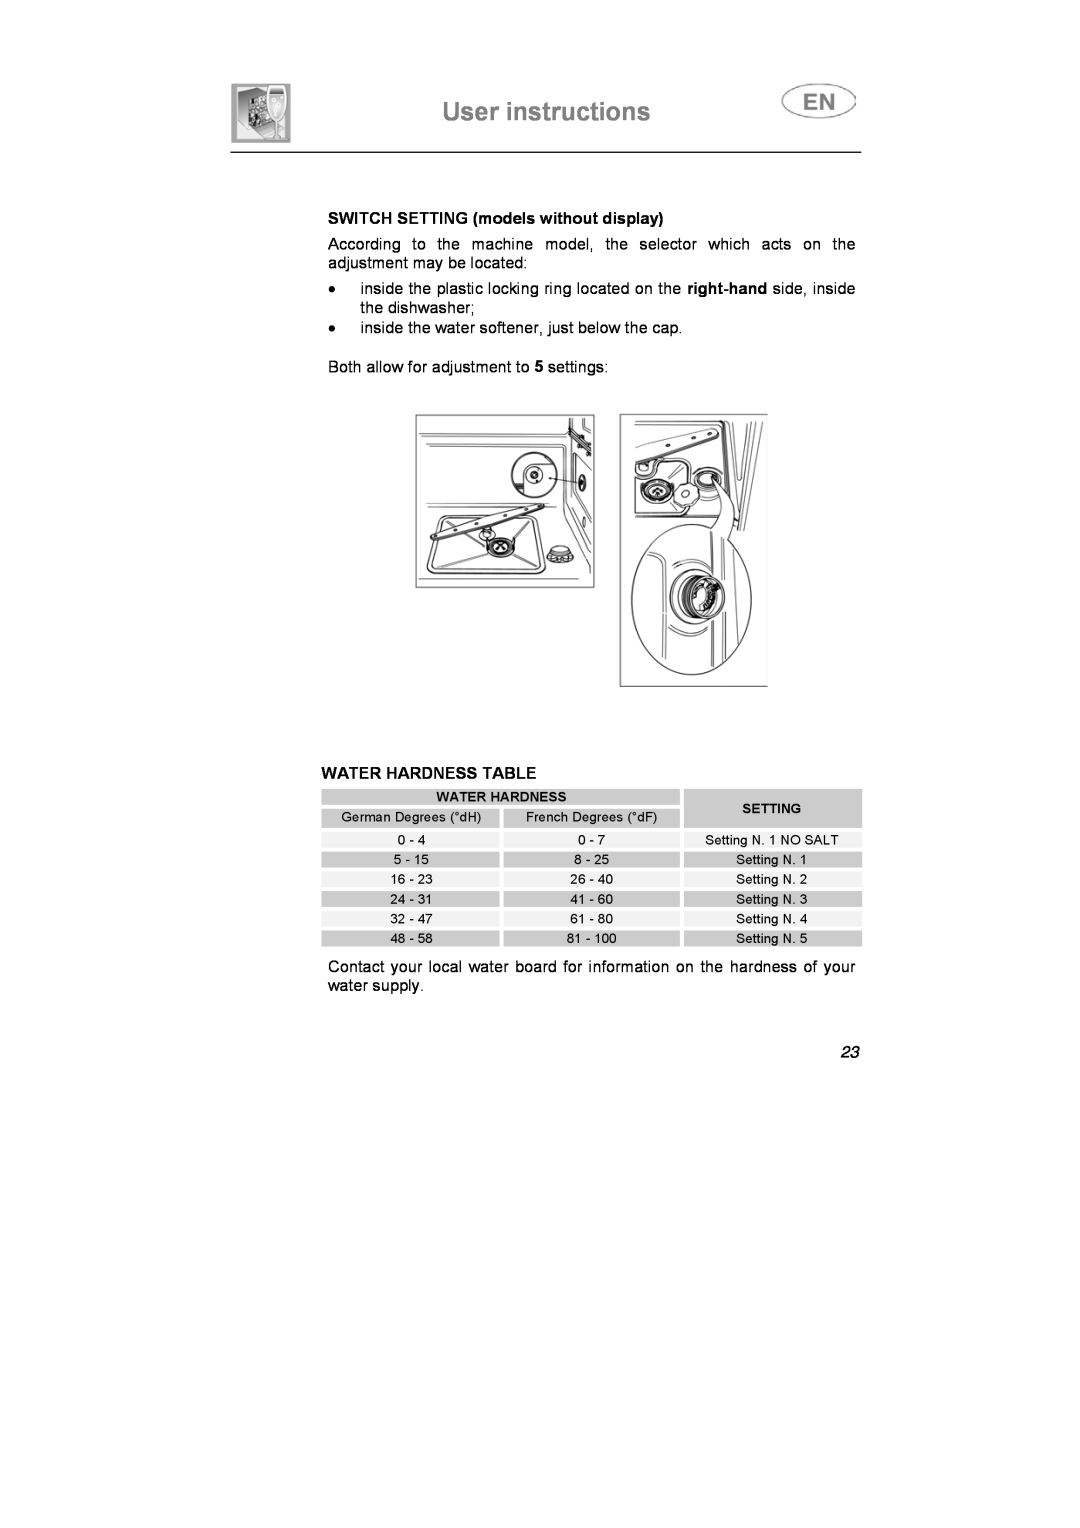 Smeg ST1124S-1 instruction manual User instructions, SWITCH SETTING models without display, Water Hardness Table 